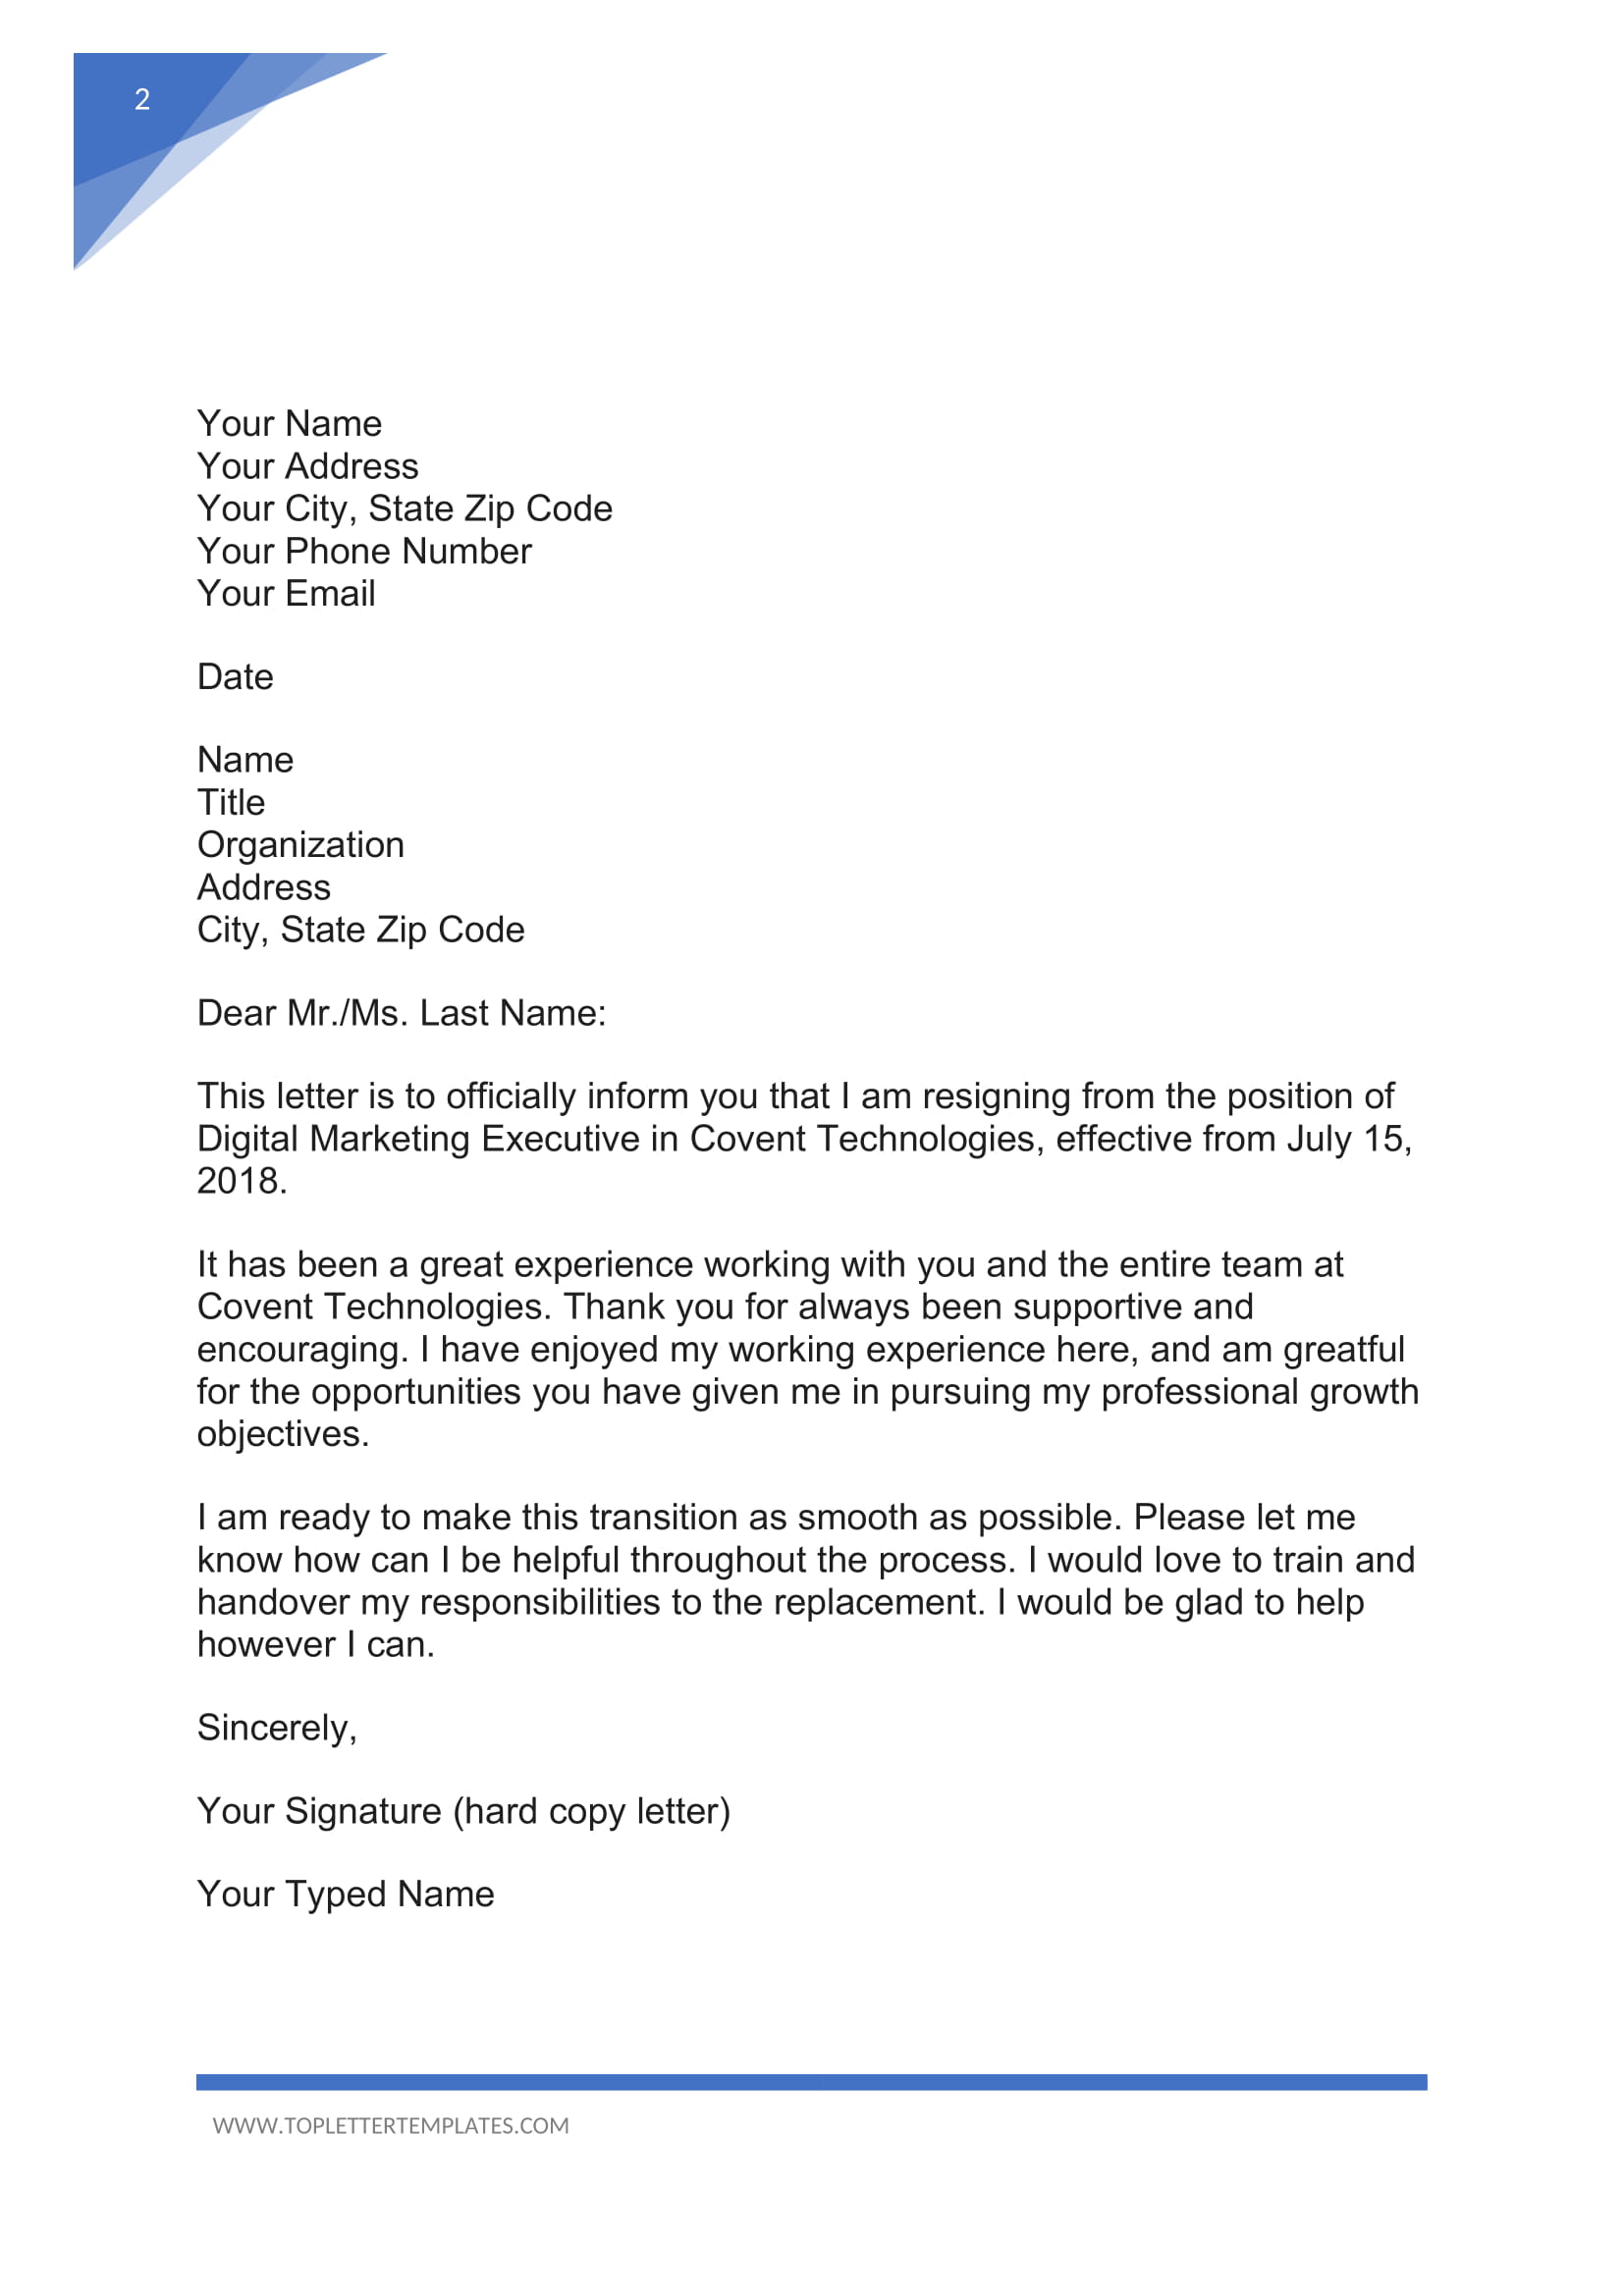 Examples Of A Resignation Letter from toplettertemplates.com